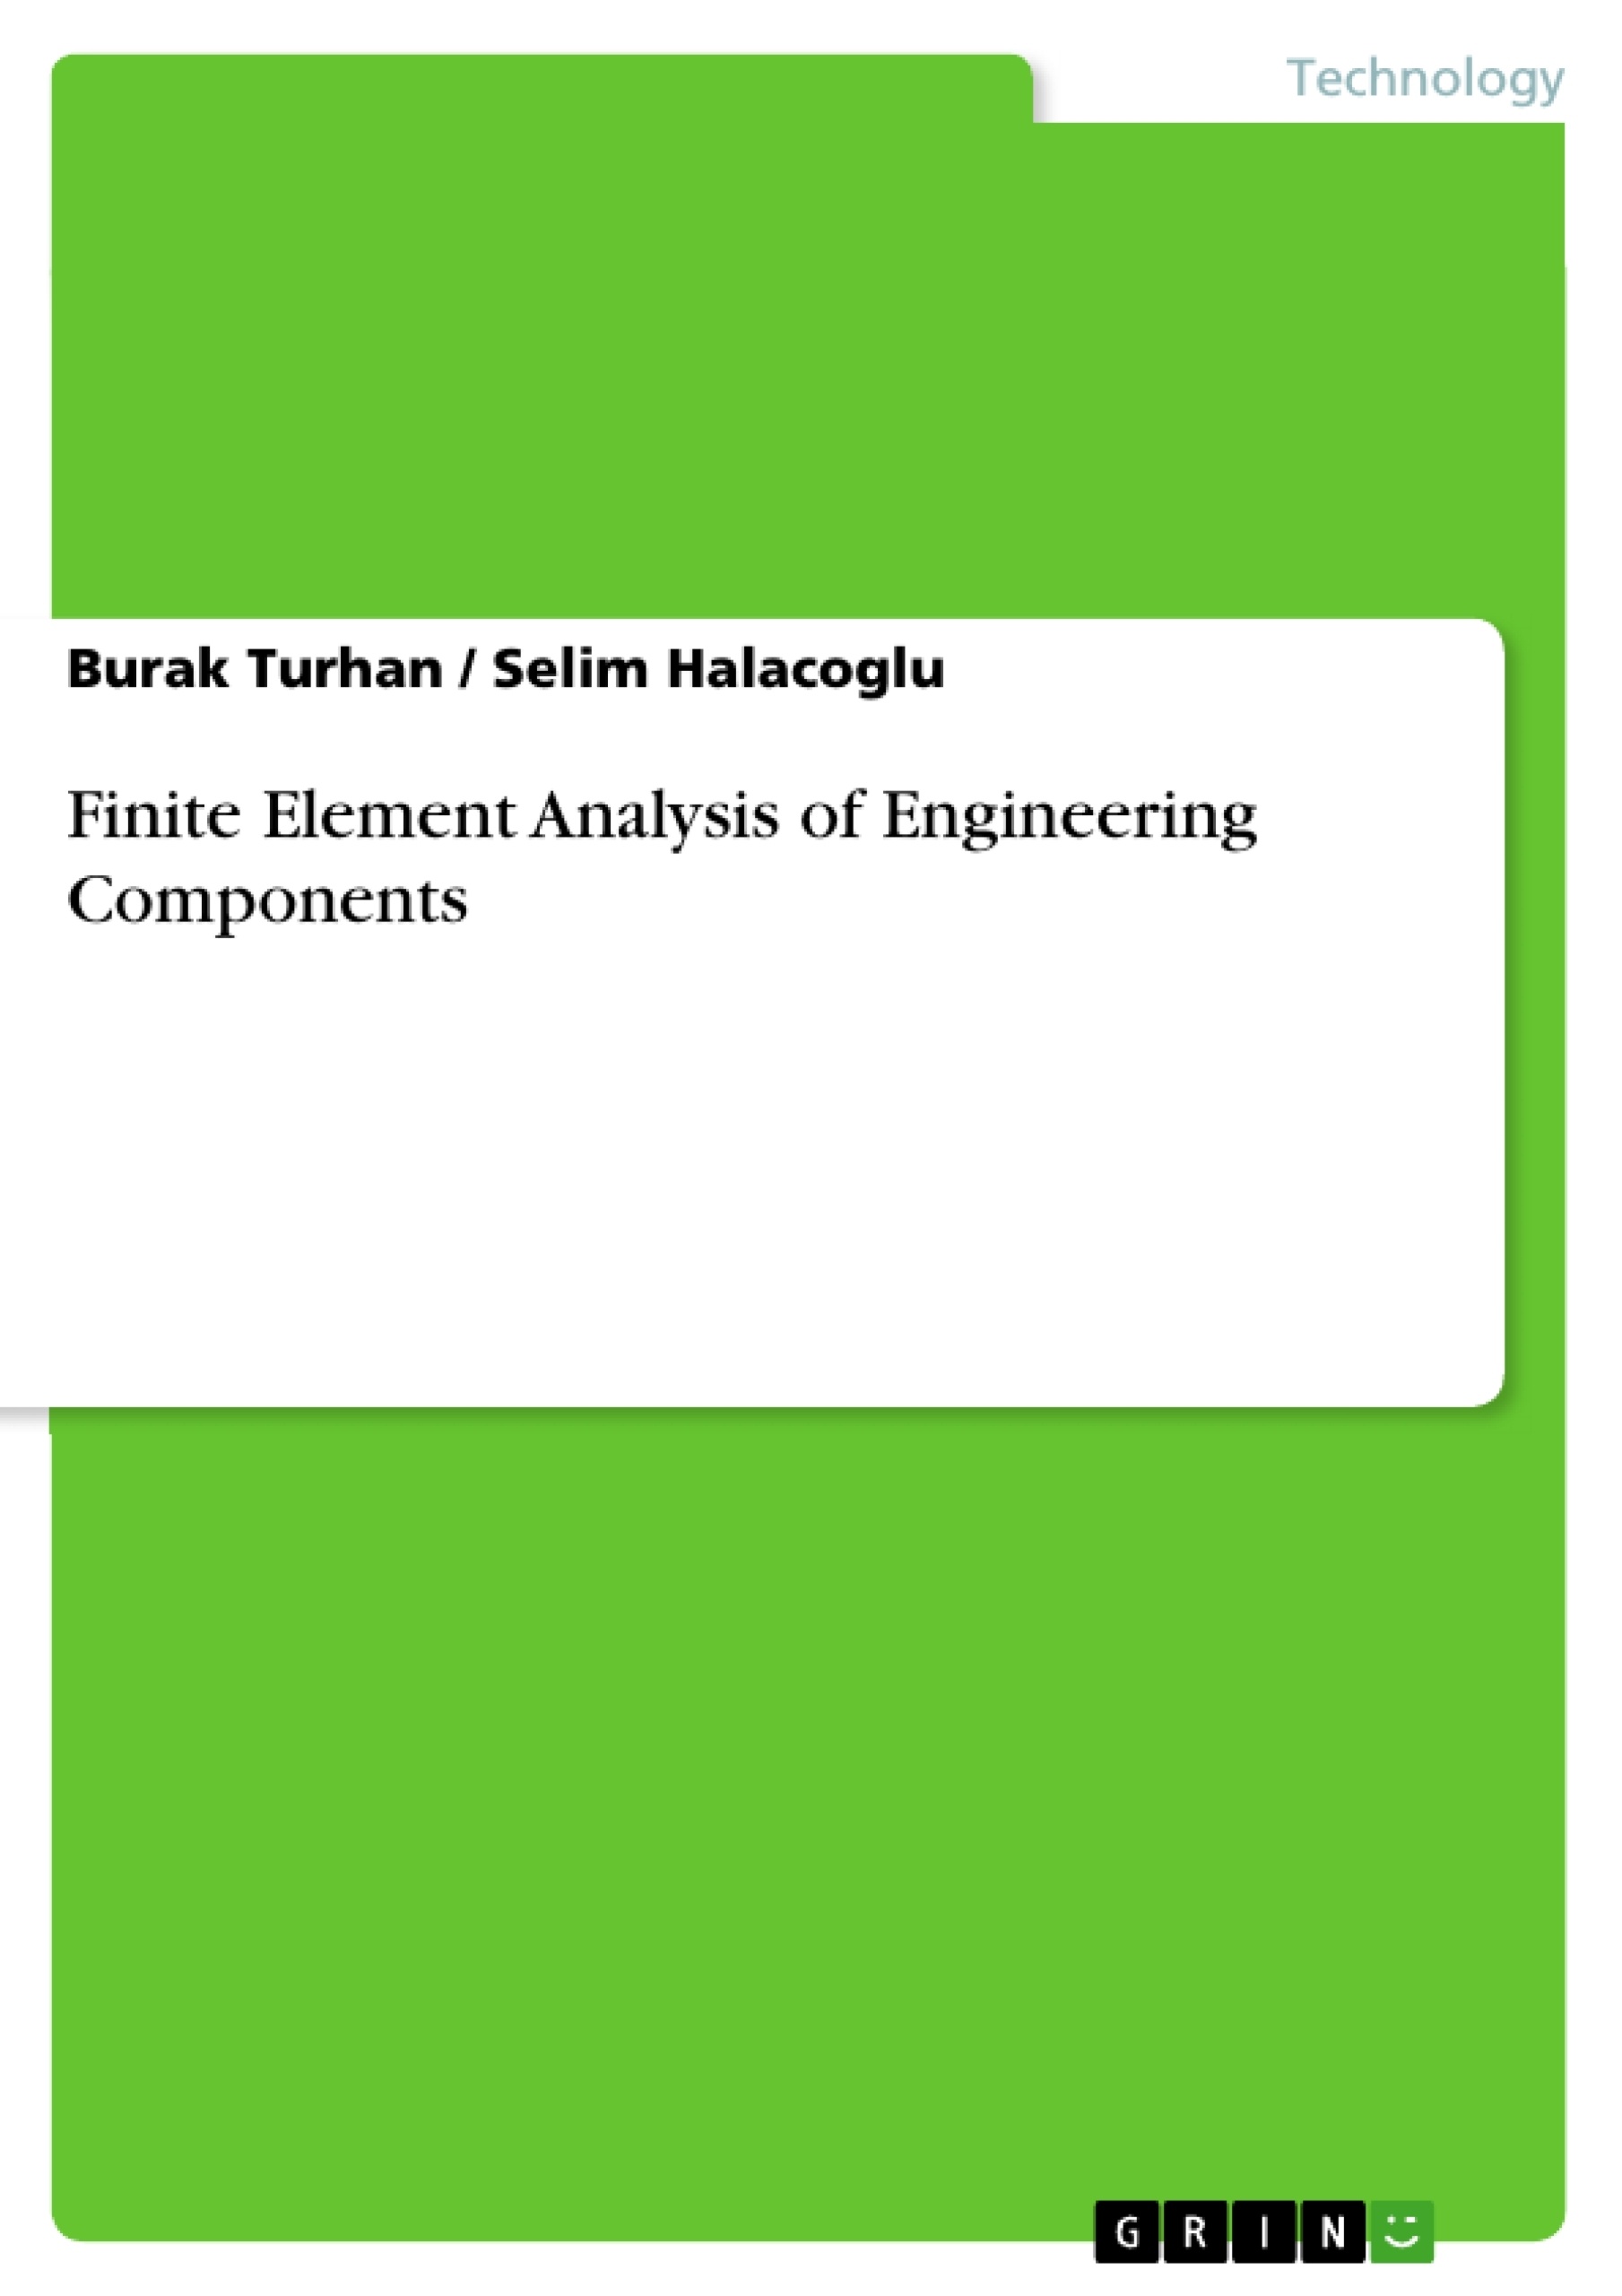 Title: Finite Element Analysis of Engineering Components